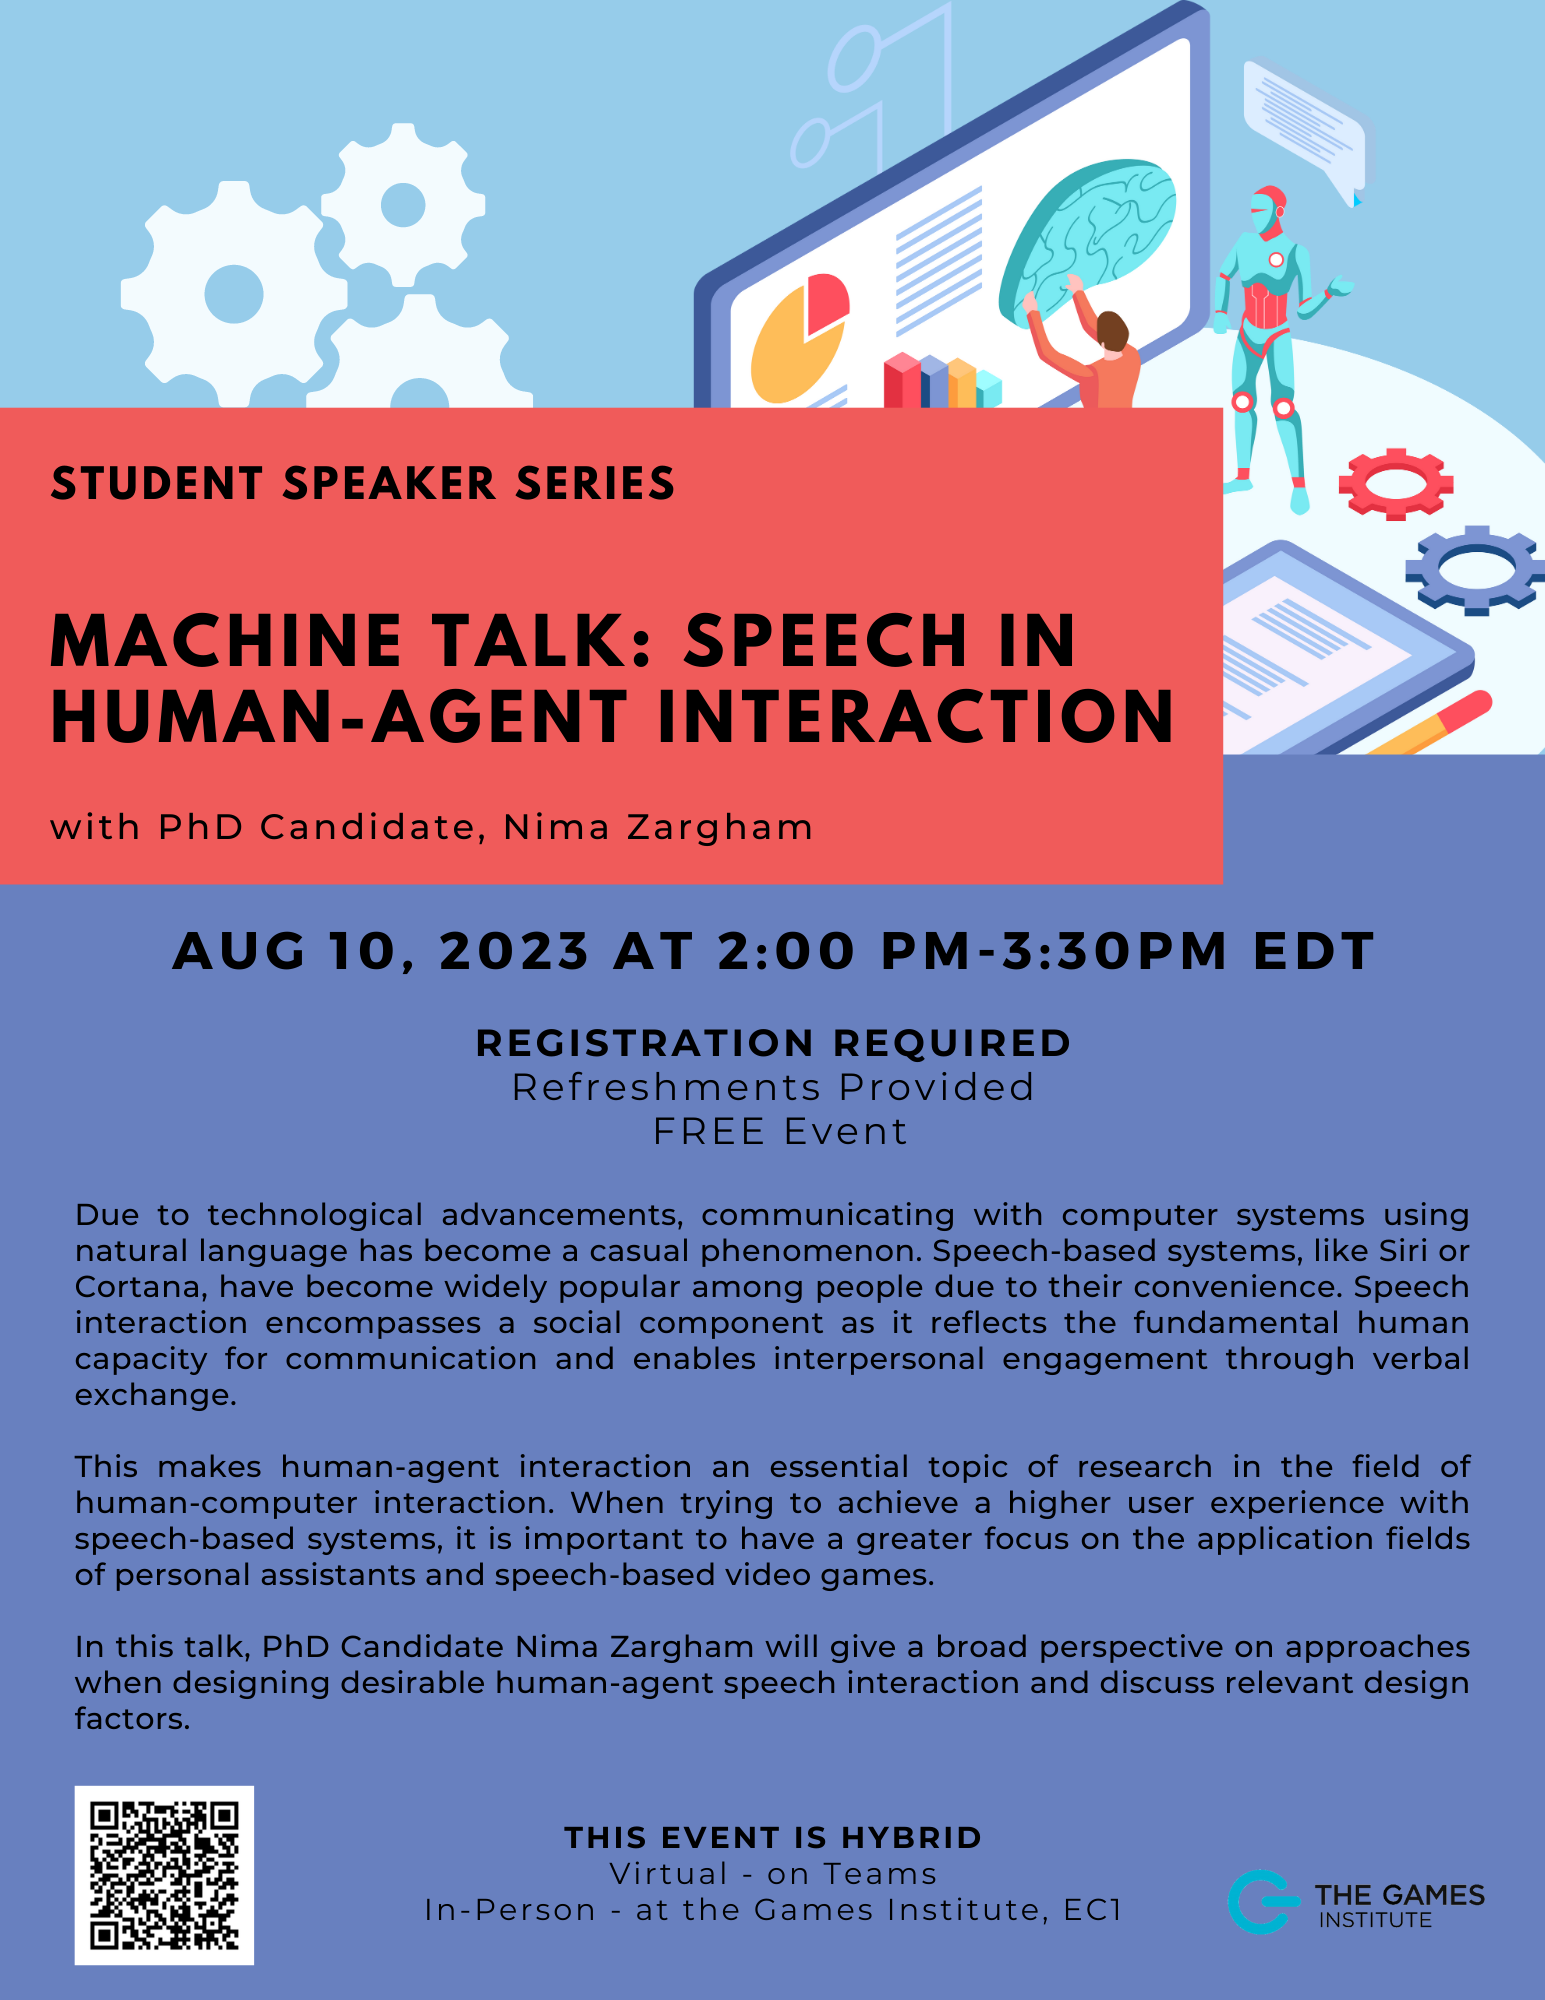 Speech in Human-Agent Interaction with Nima Zargham